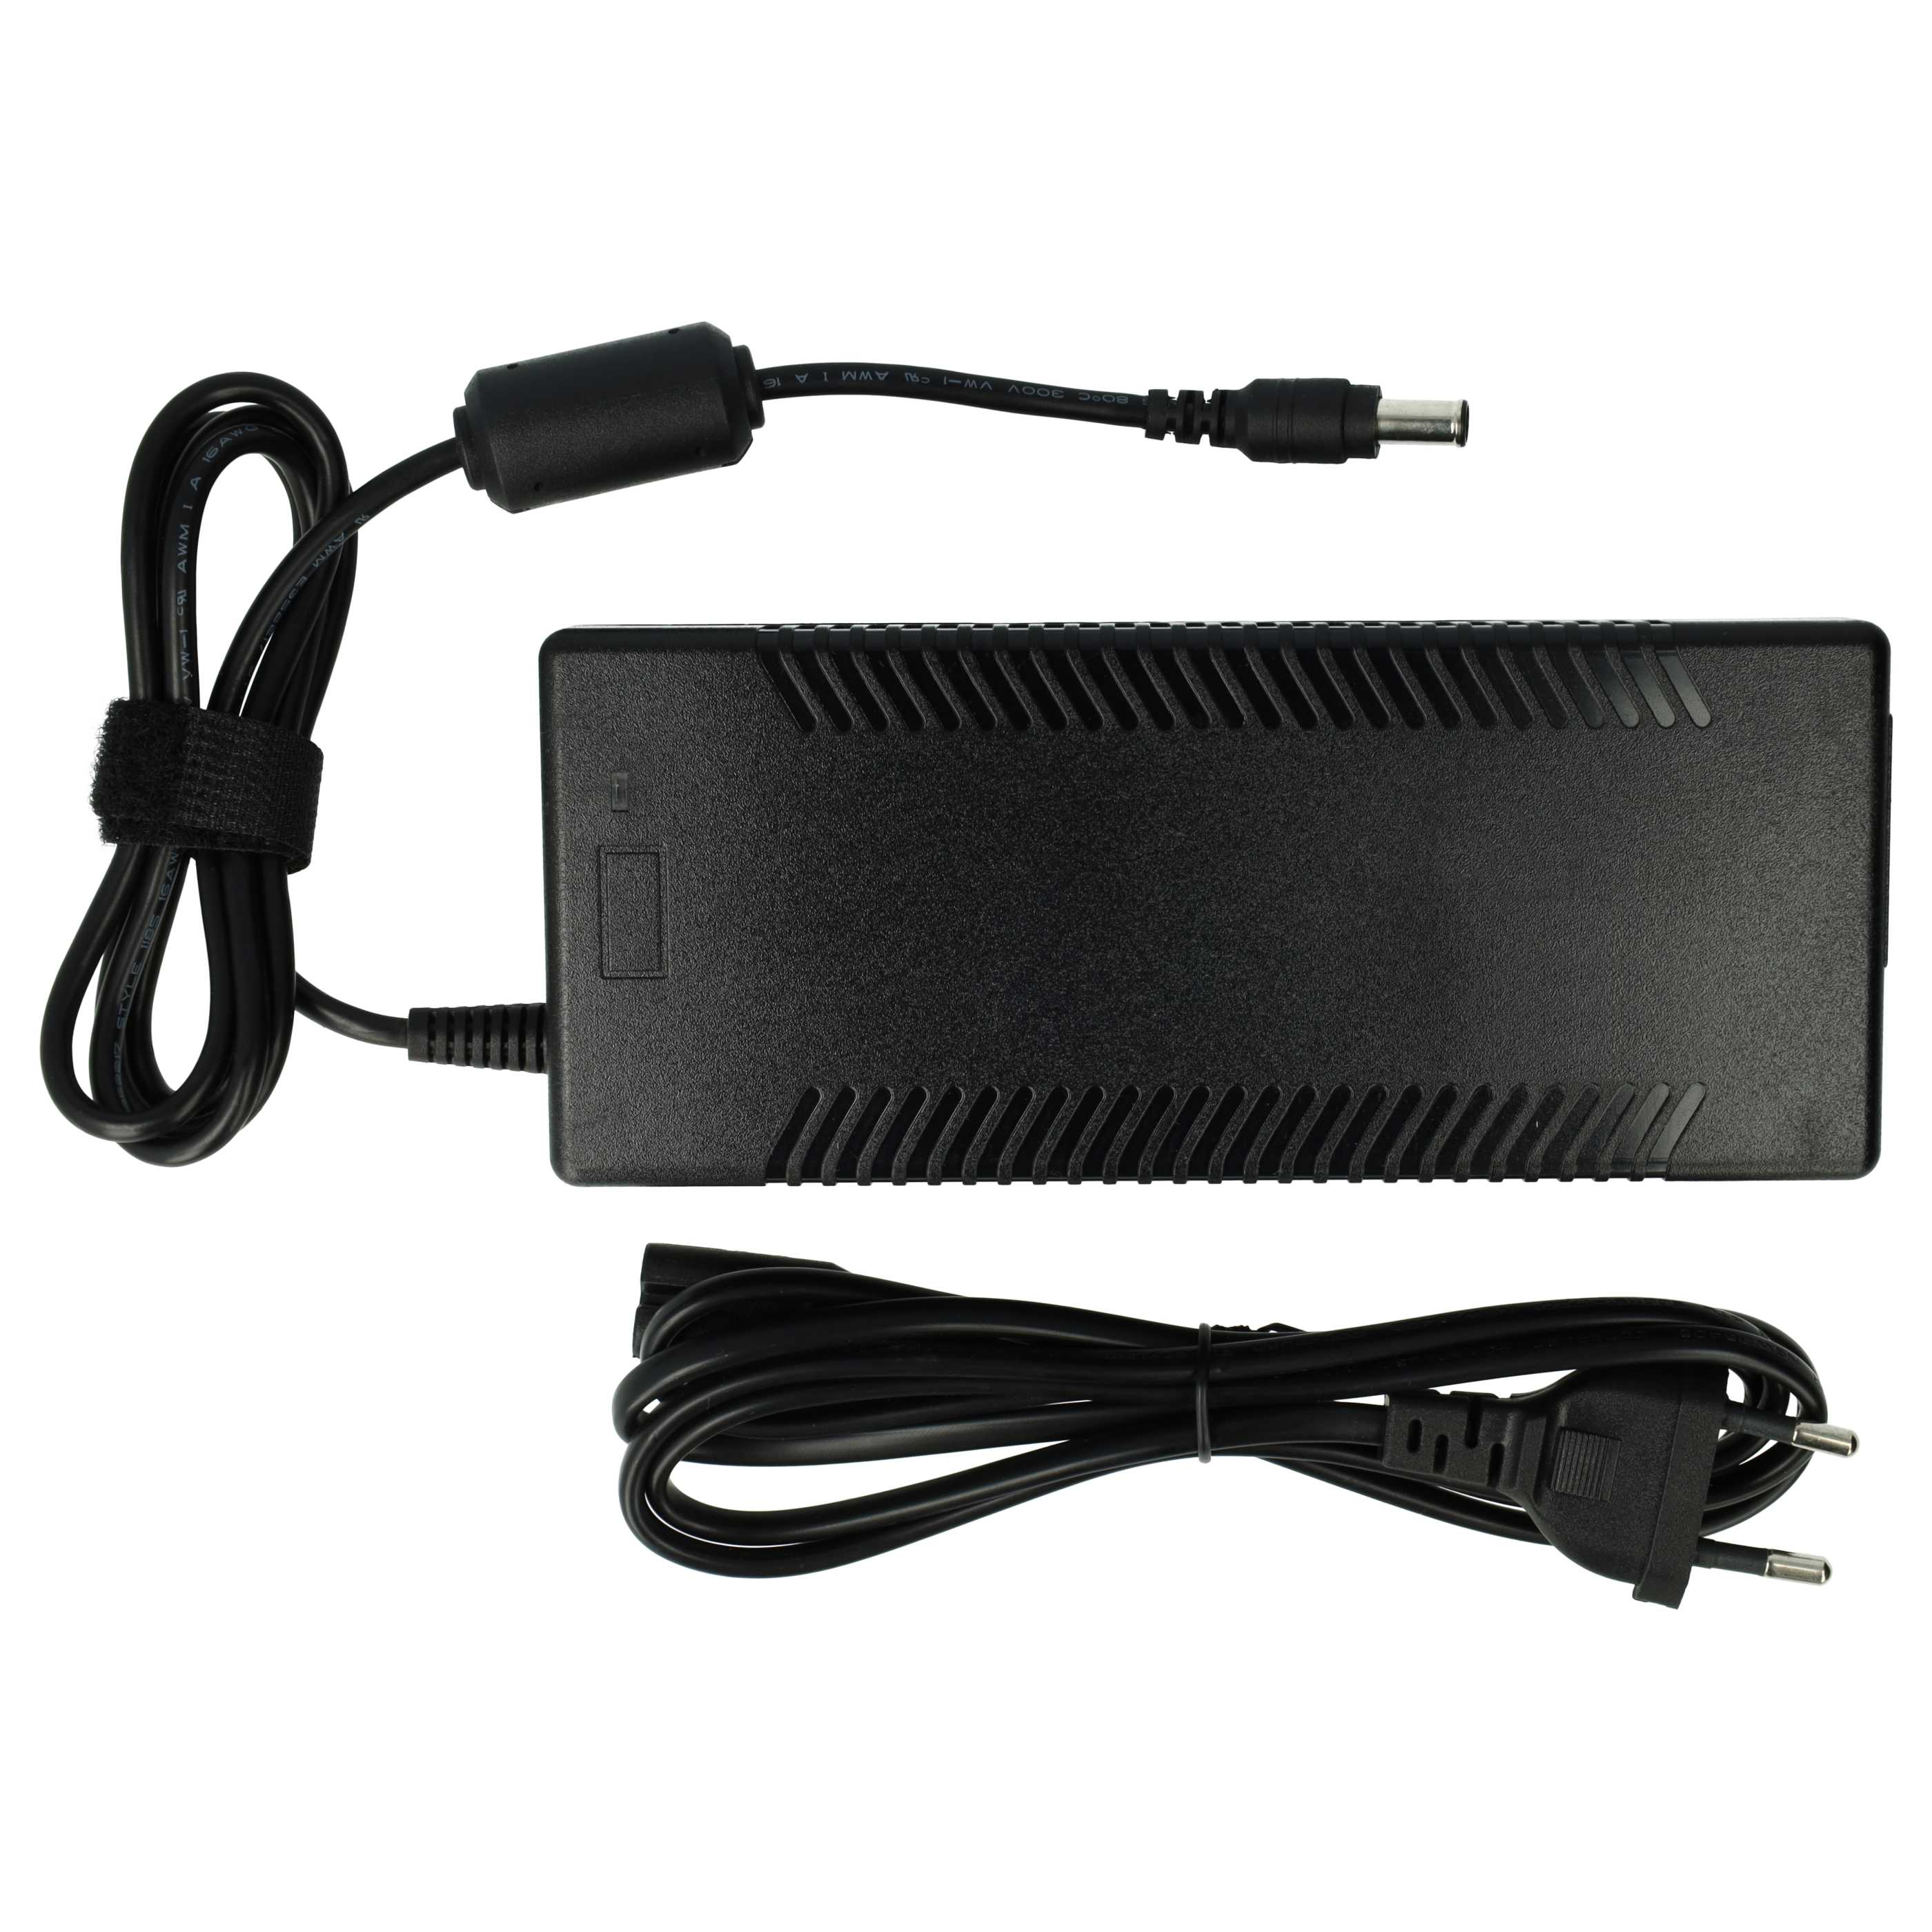 Mains Power Adapter replaces Sony PCGA-AC19V3 for SonyNotebook, 120 W